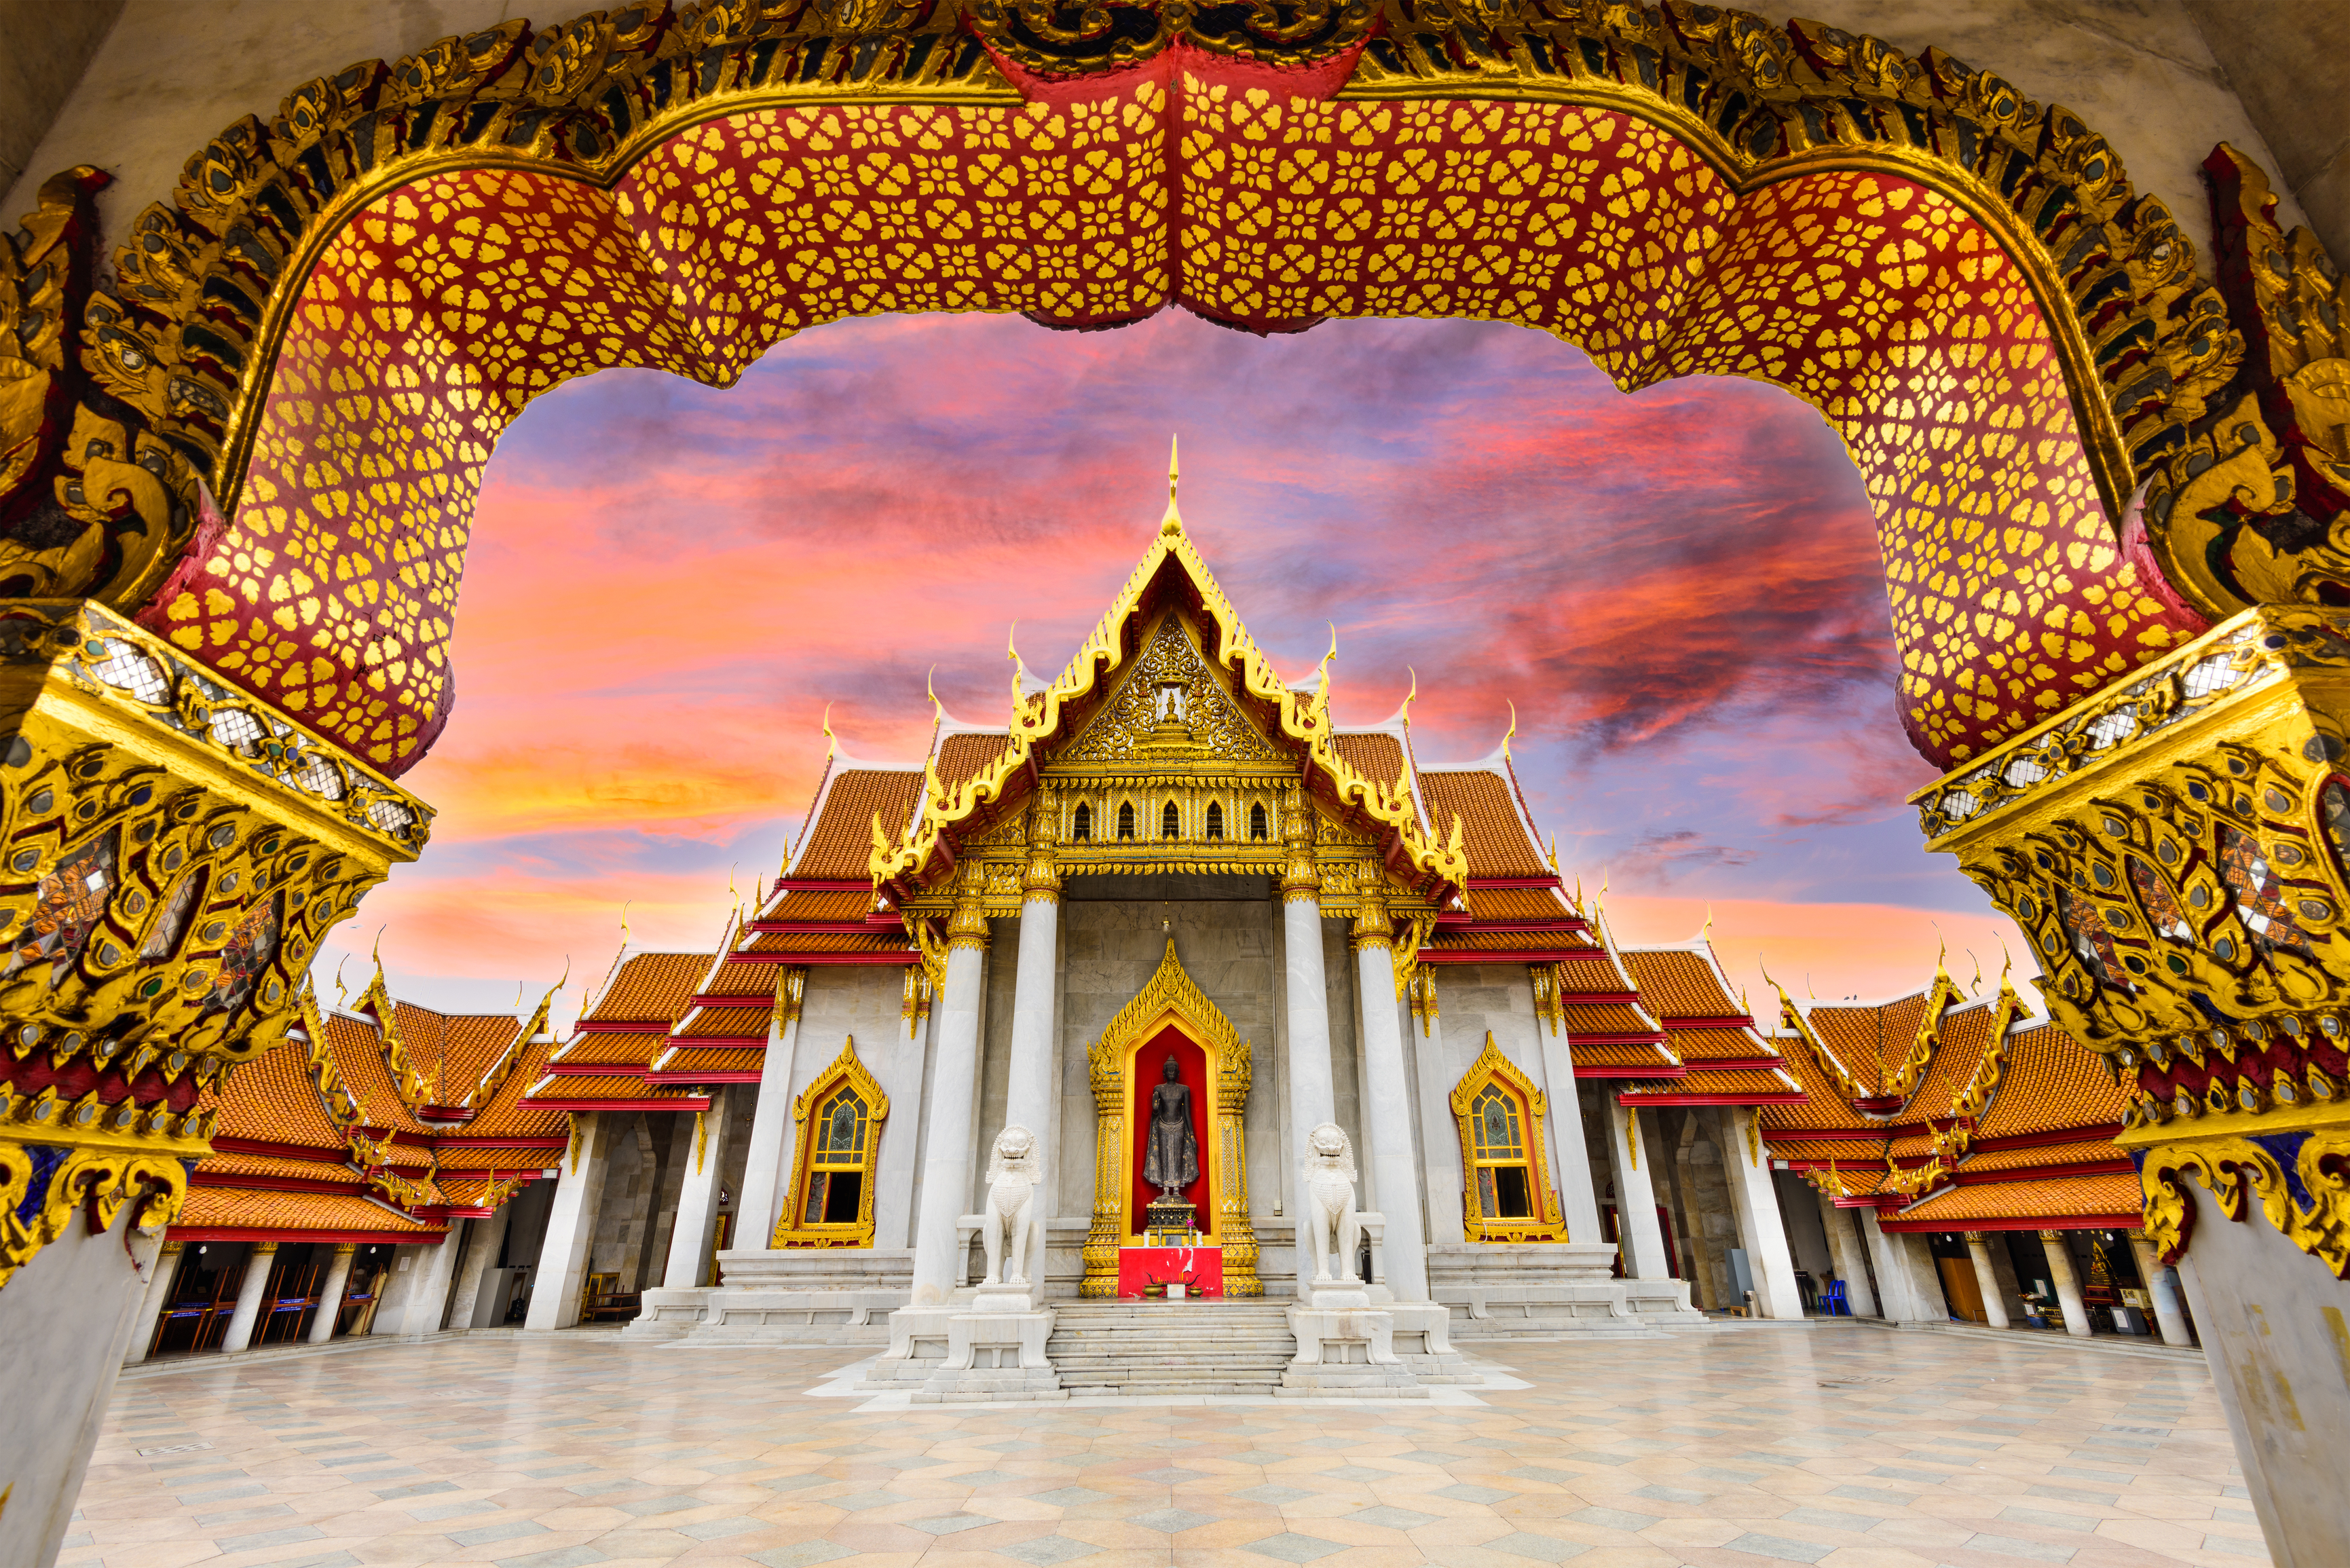 Flights to Bangkok in the $500s & $600s round-trip